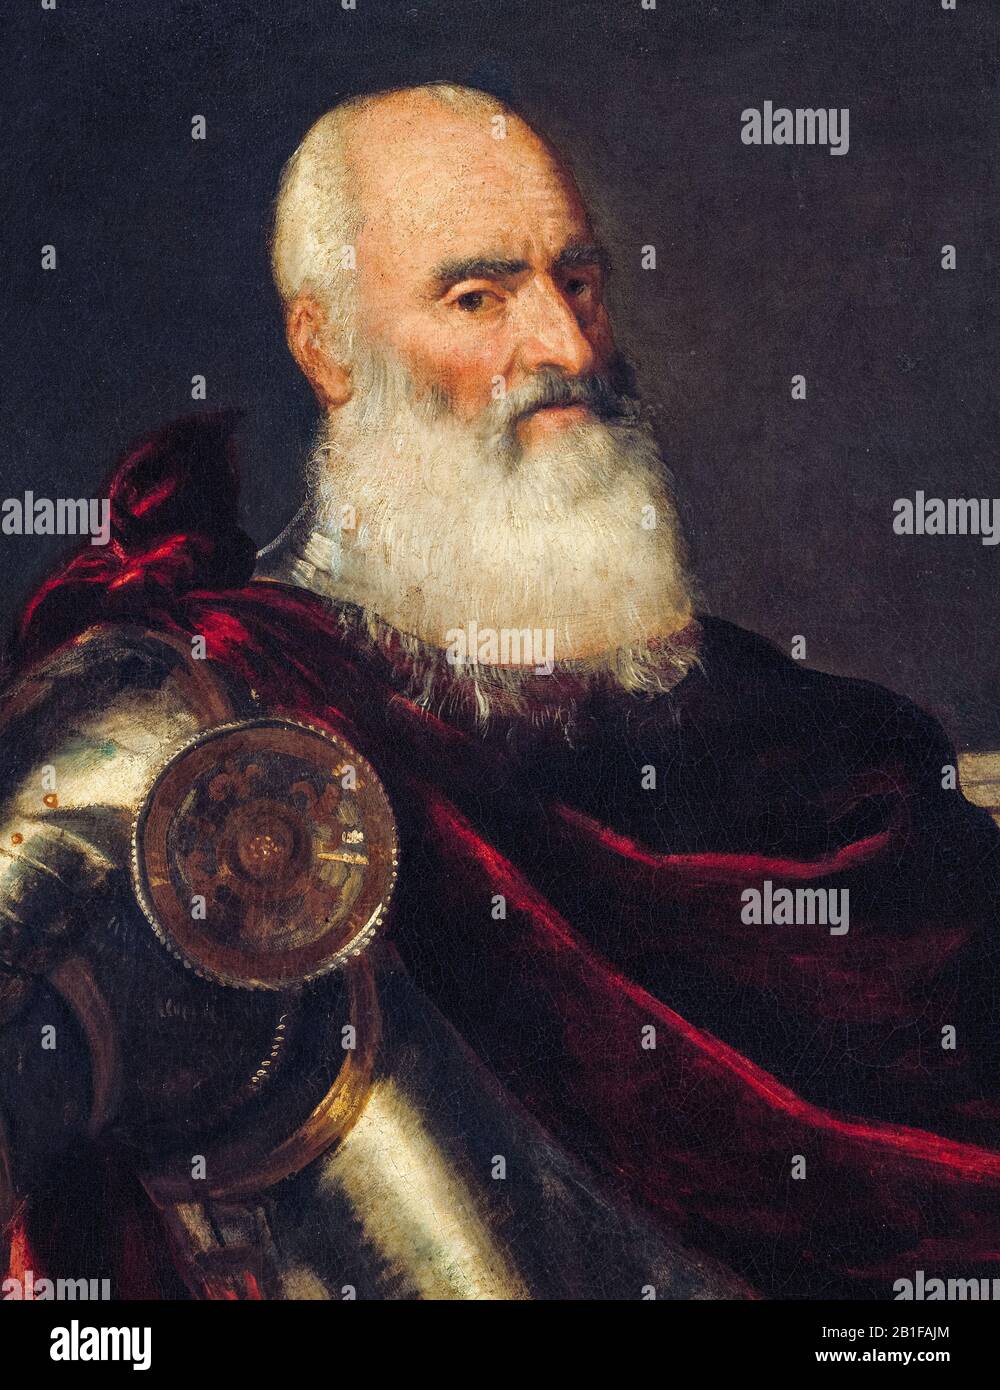 Vincenzo Cappello (1469-1541), Venetian Navy Admiral, full armour, portrait painting detail by Titian, circa 1540 Stock Photo